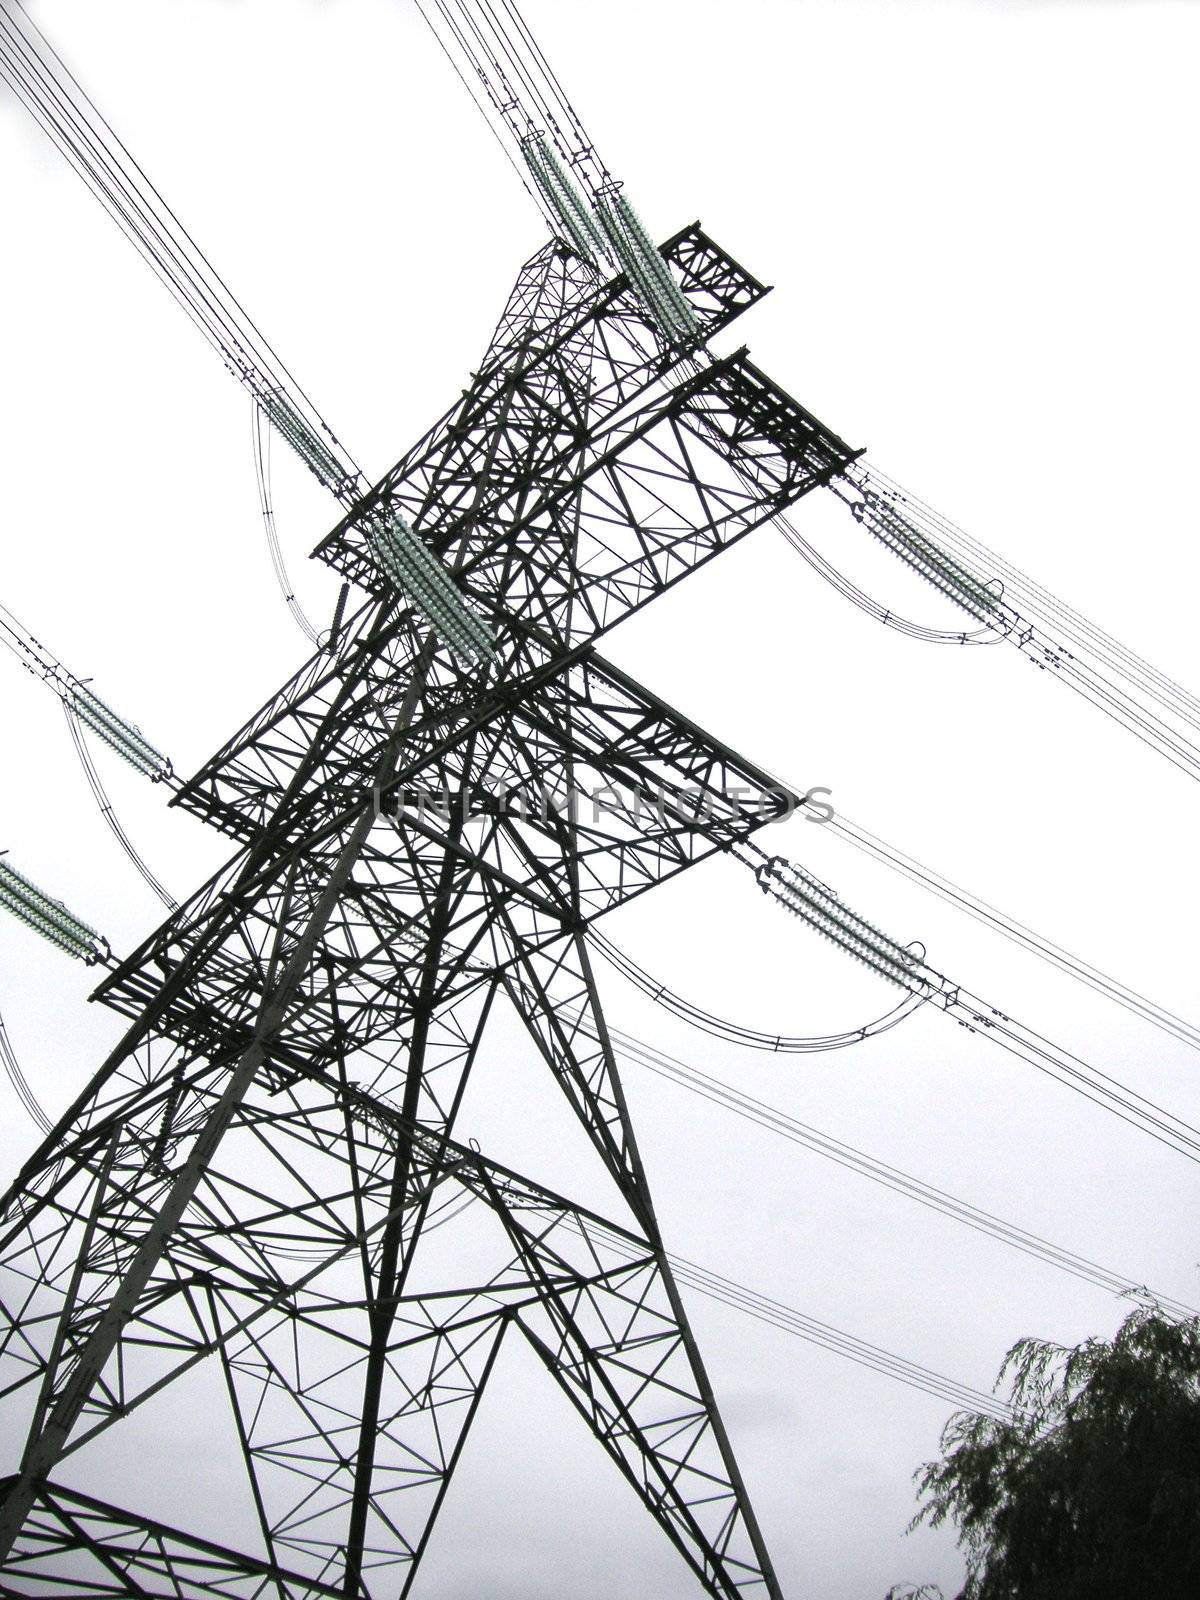 abstract electricity pylon by leafy